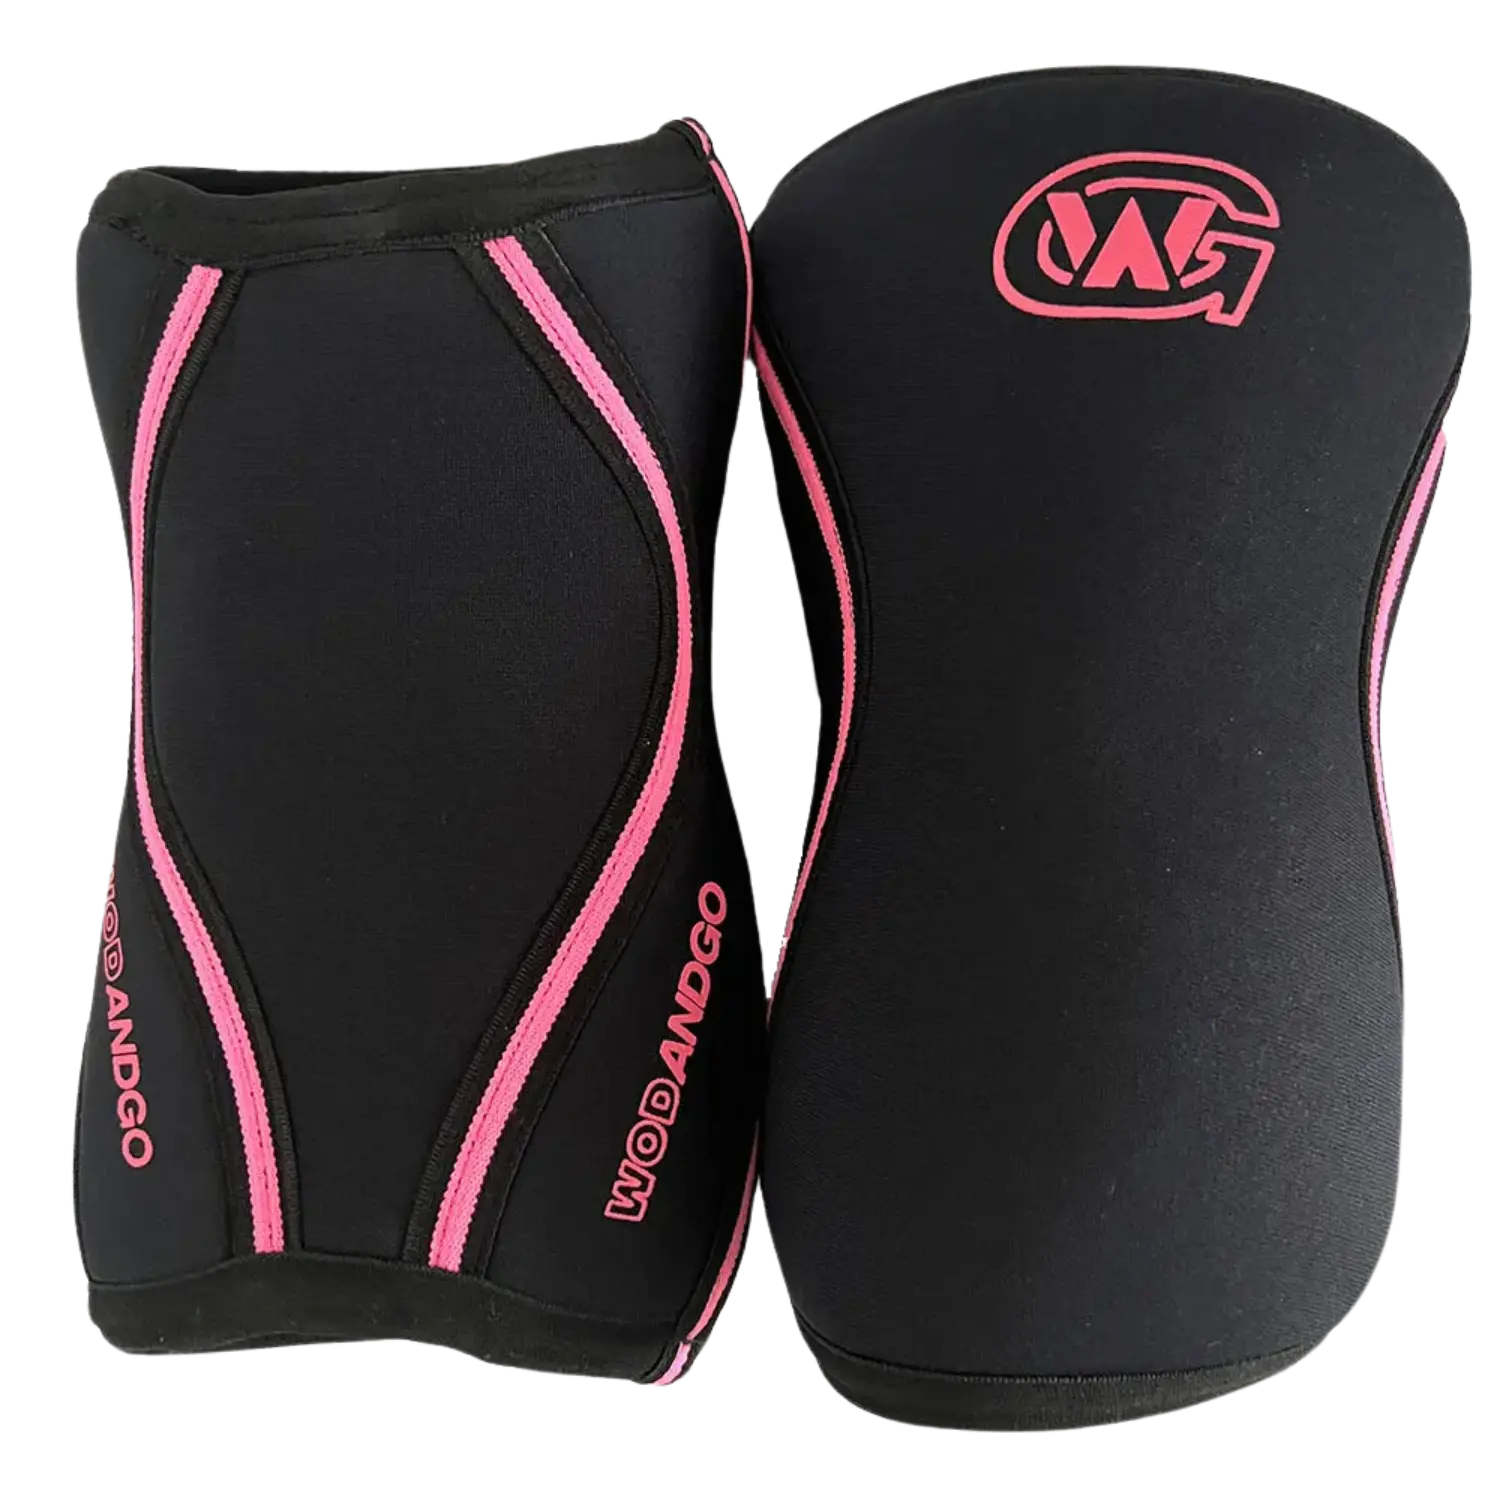 Black and pink knee pads